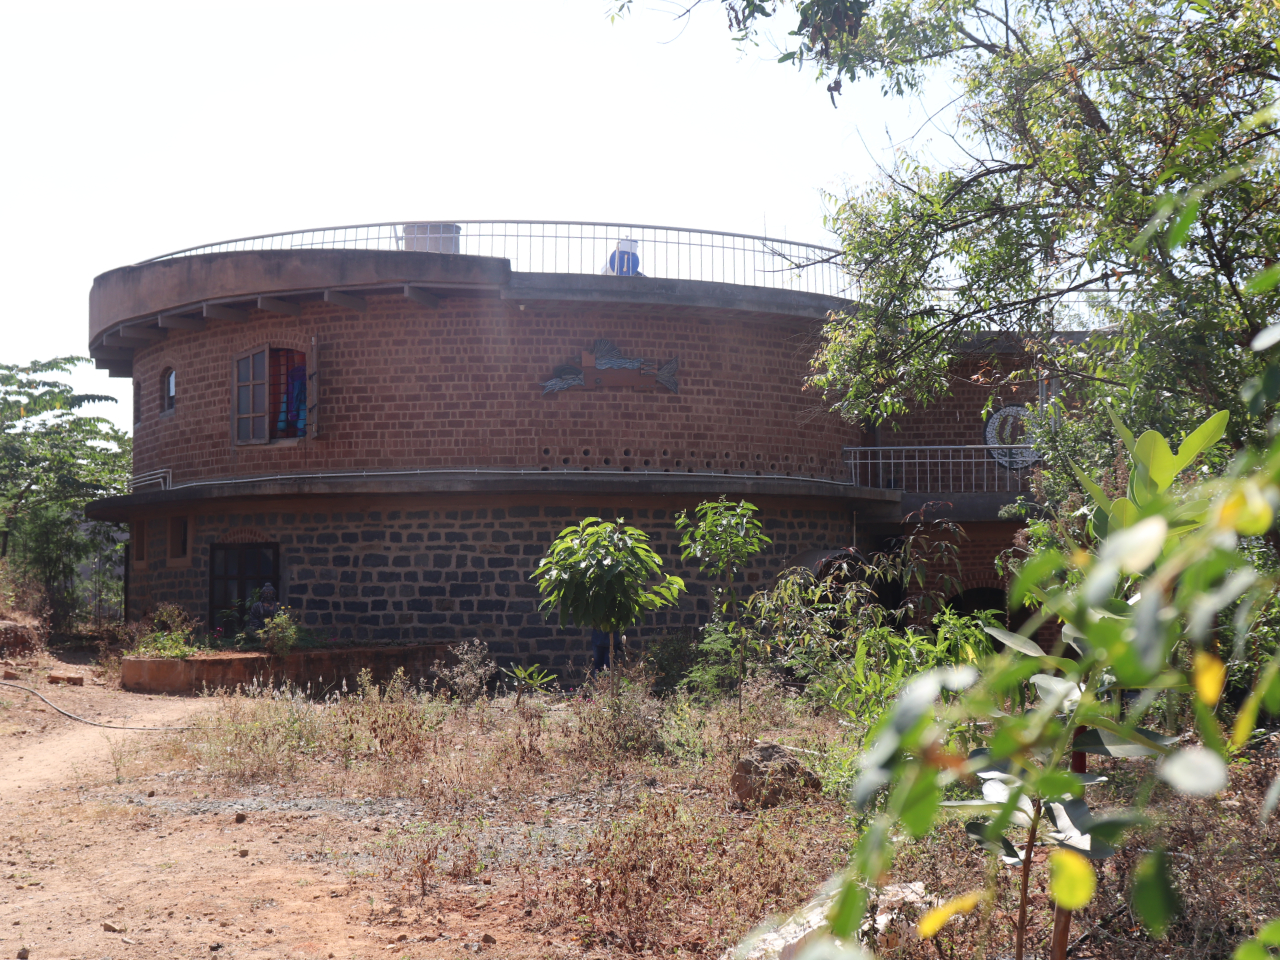 Suresh & Geetha’s house, Dharmapuri - A load bearing structure with stone and cob walls, filler slab roof, and madras terrace in mud mortar. Water harvesting tank in the central courtyard , composting toilets and grey water recycling.  Area 3200 sqft ; Total cost 35,00,000/-